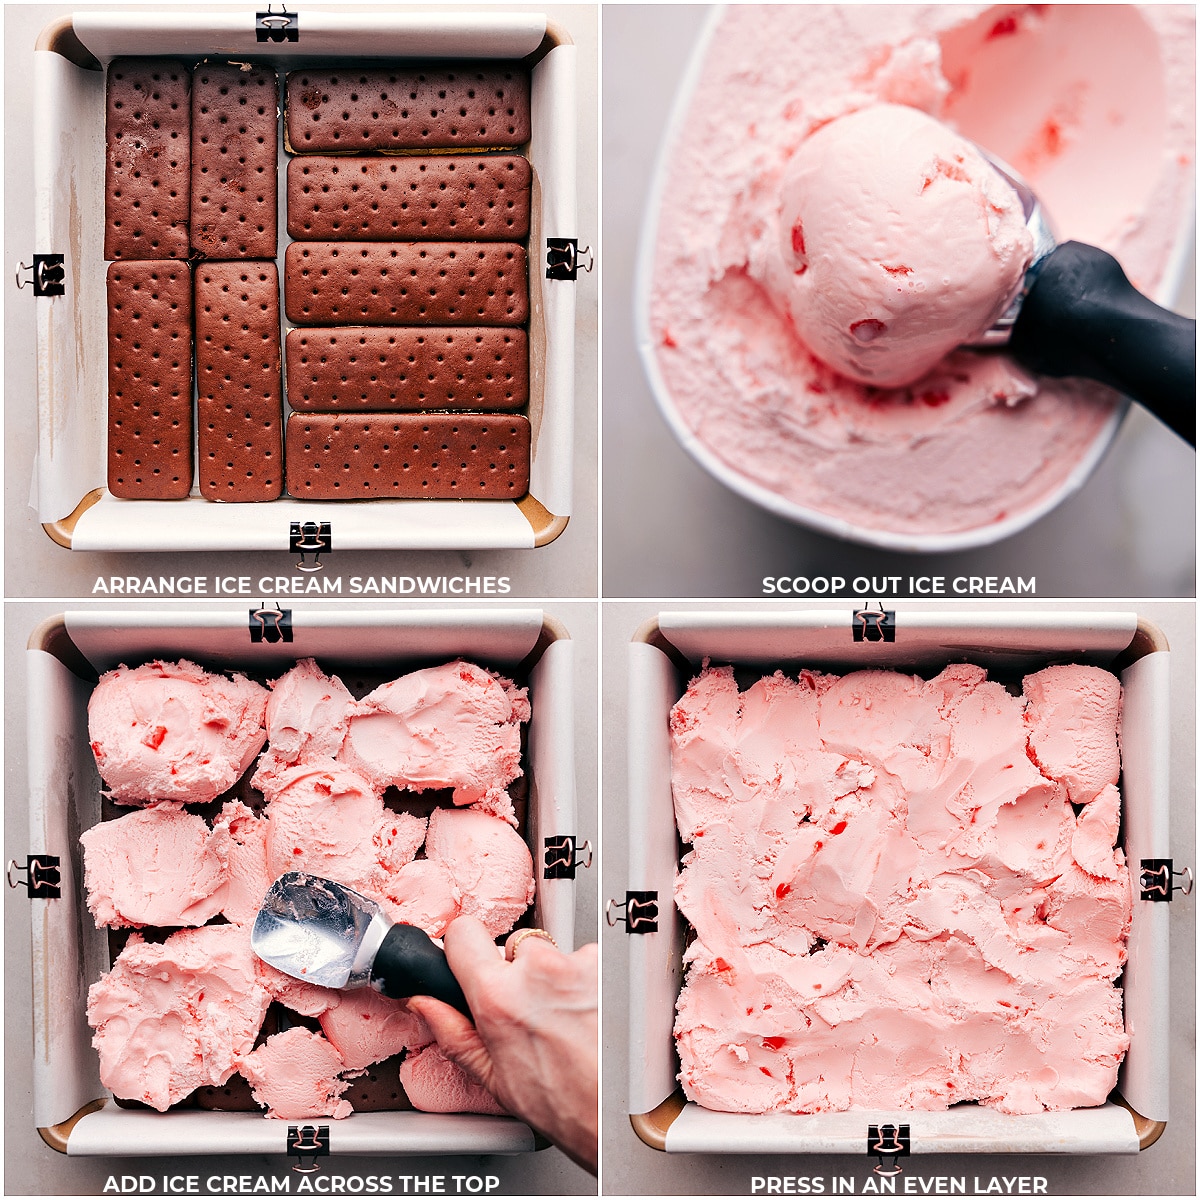 Layering ice cream sandwiches, scooping in peppermint ice cream, and pressing everything together into one cohesive layer to create these delicious and flavorful Peppermint Ice Cream Bars.